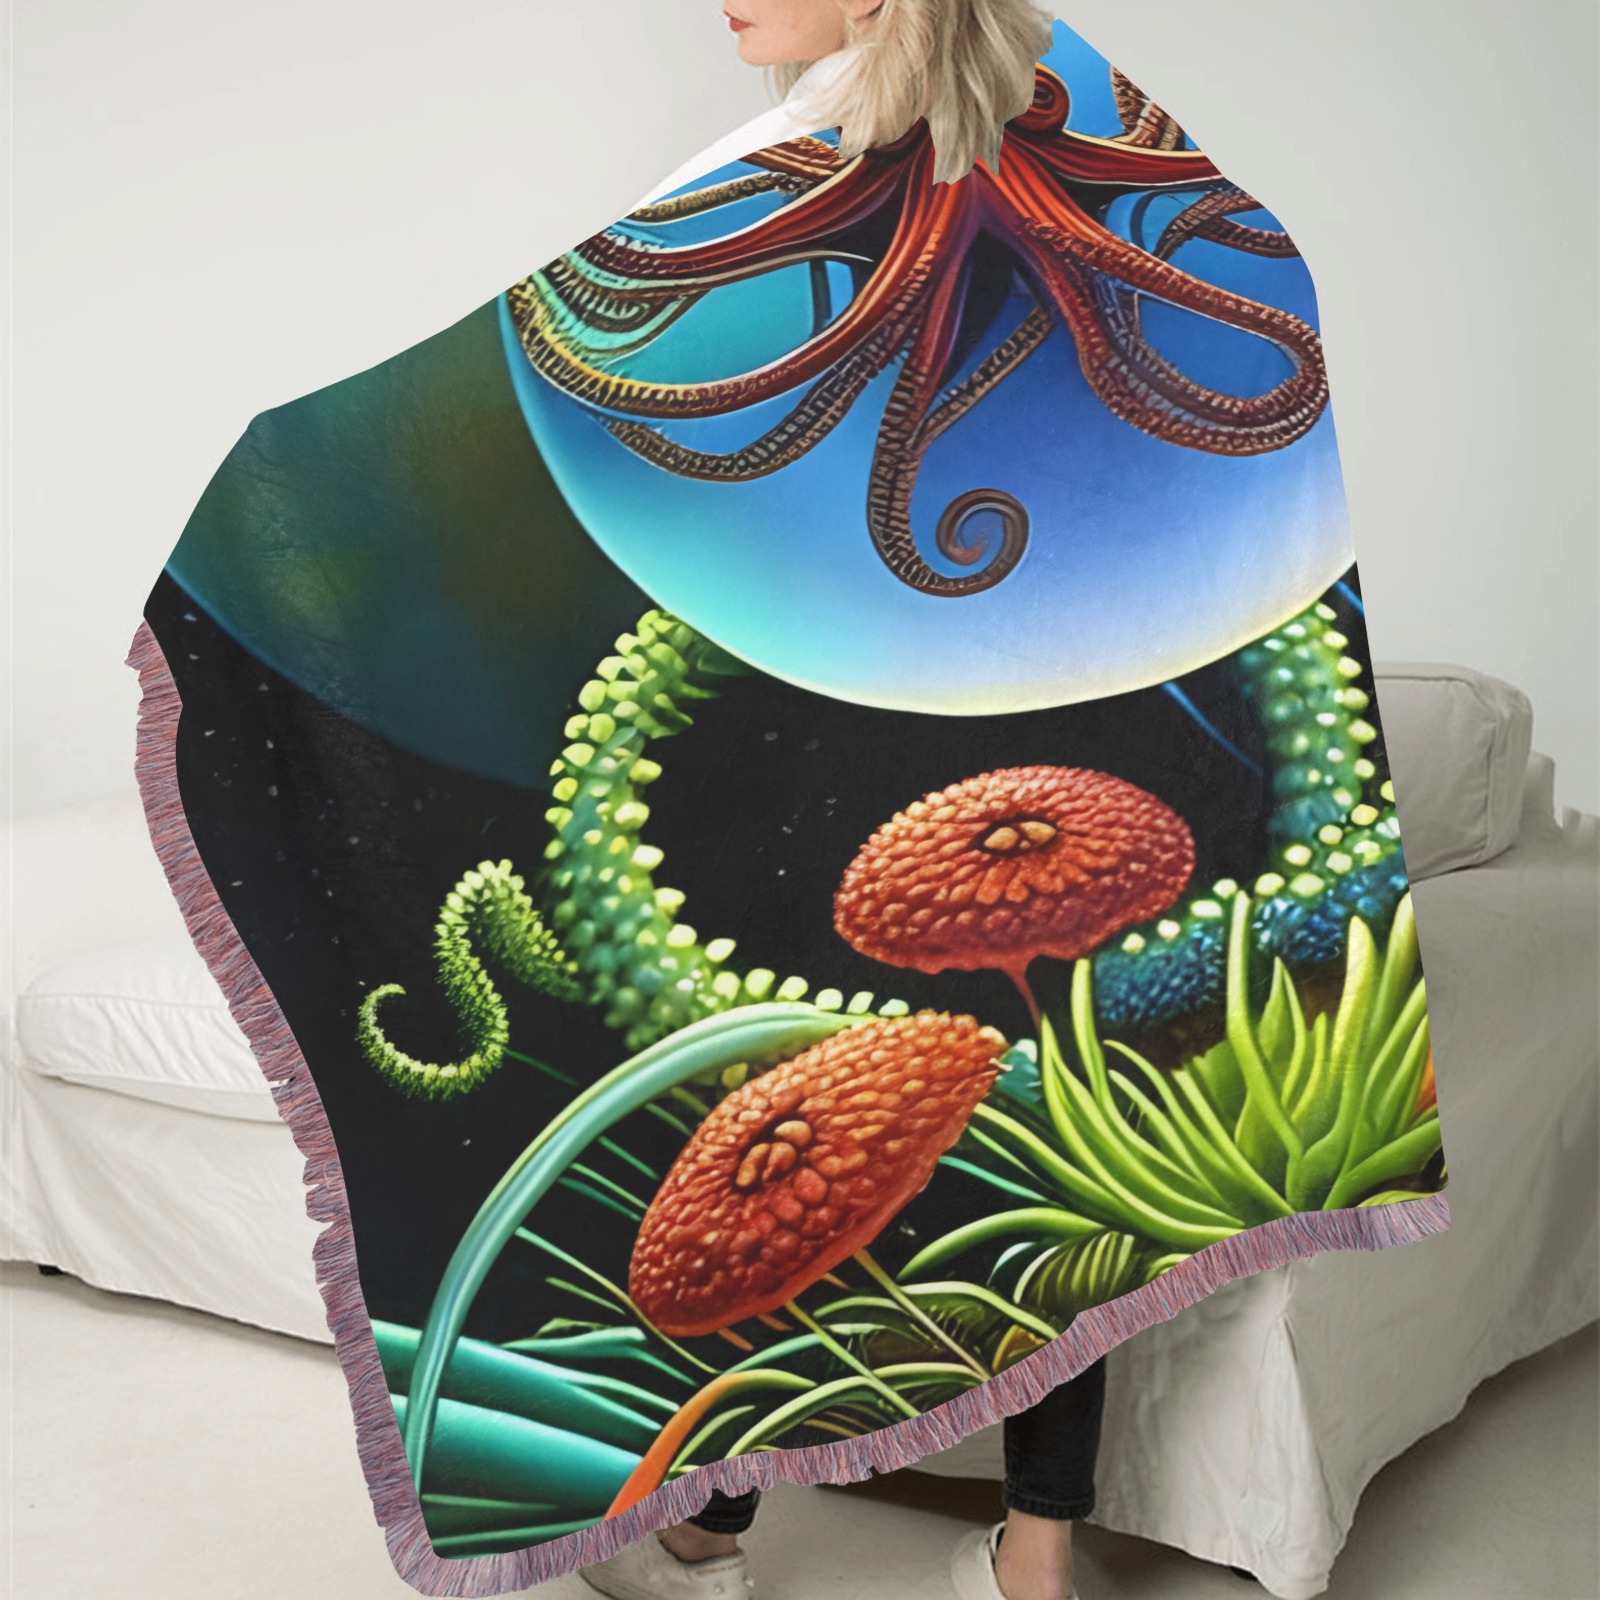 Out Of This World Spheres Octopus Ultra-Soft Fringe Blanket 50"x60" (Mixed Pink)